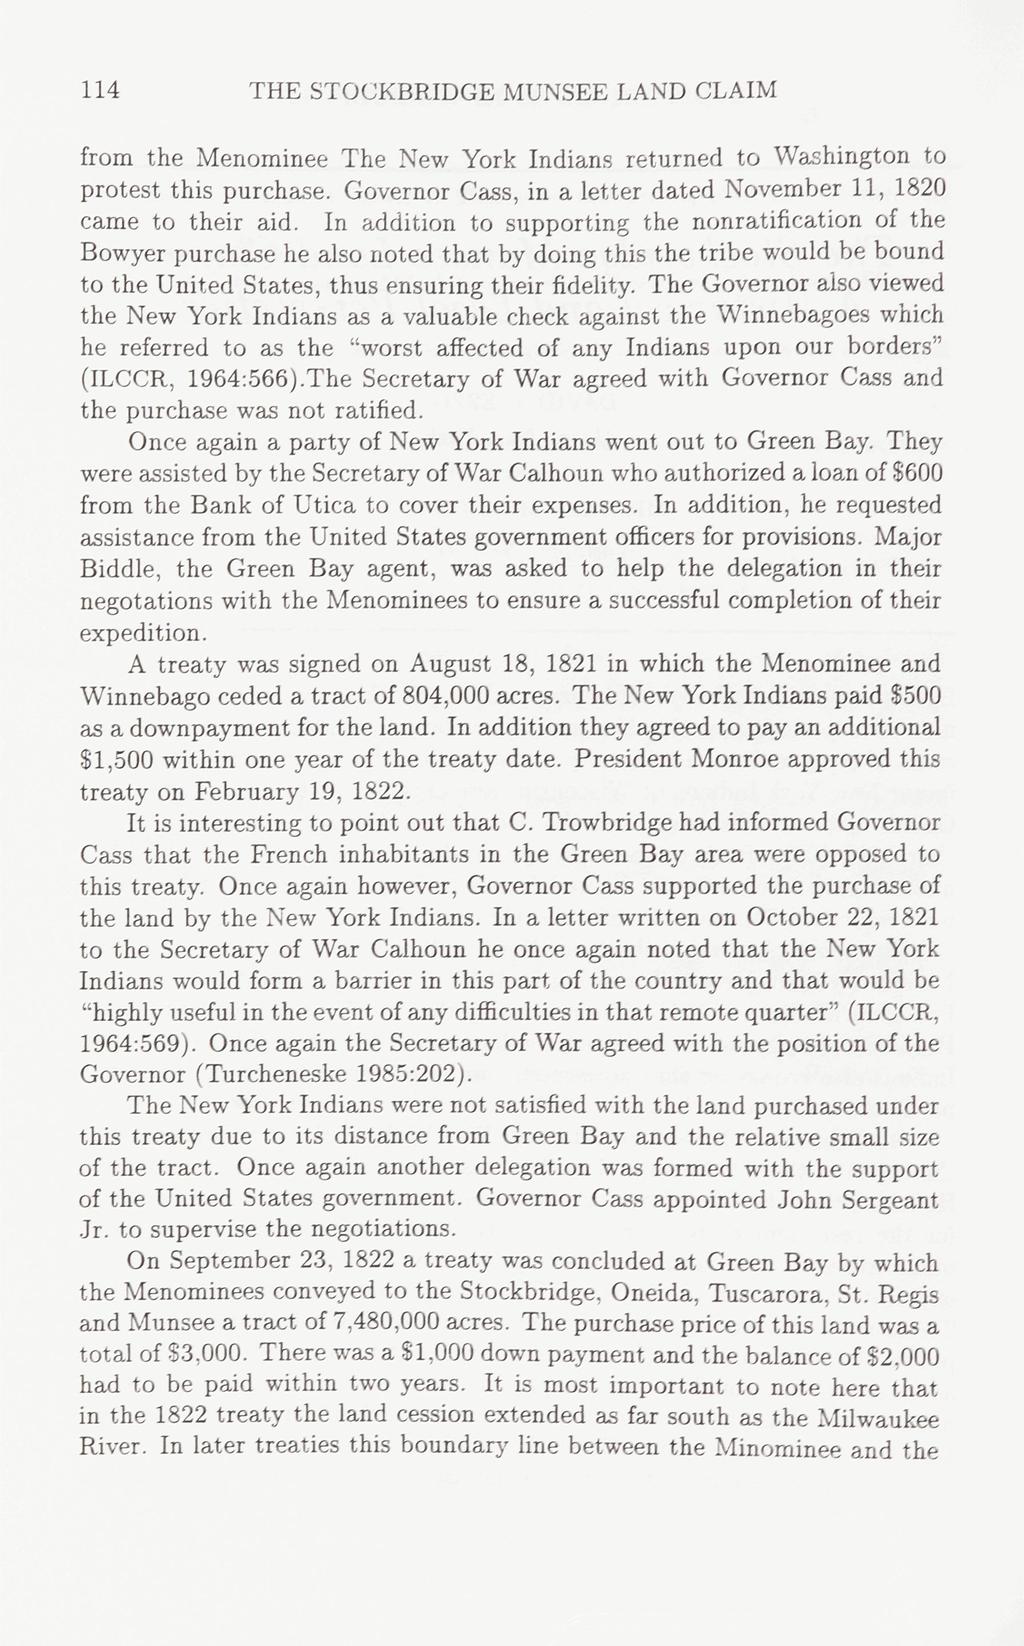 114 THE STOCKBRIDGE MUNSEE LAND CLAIM from the Menominee The New York Indians returned to Washington to protest this purchase. Governor Cass, in a letter dated November 11, 1820 came to their aid.